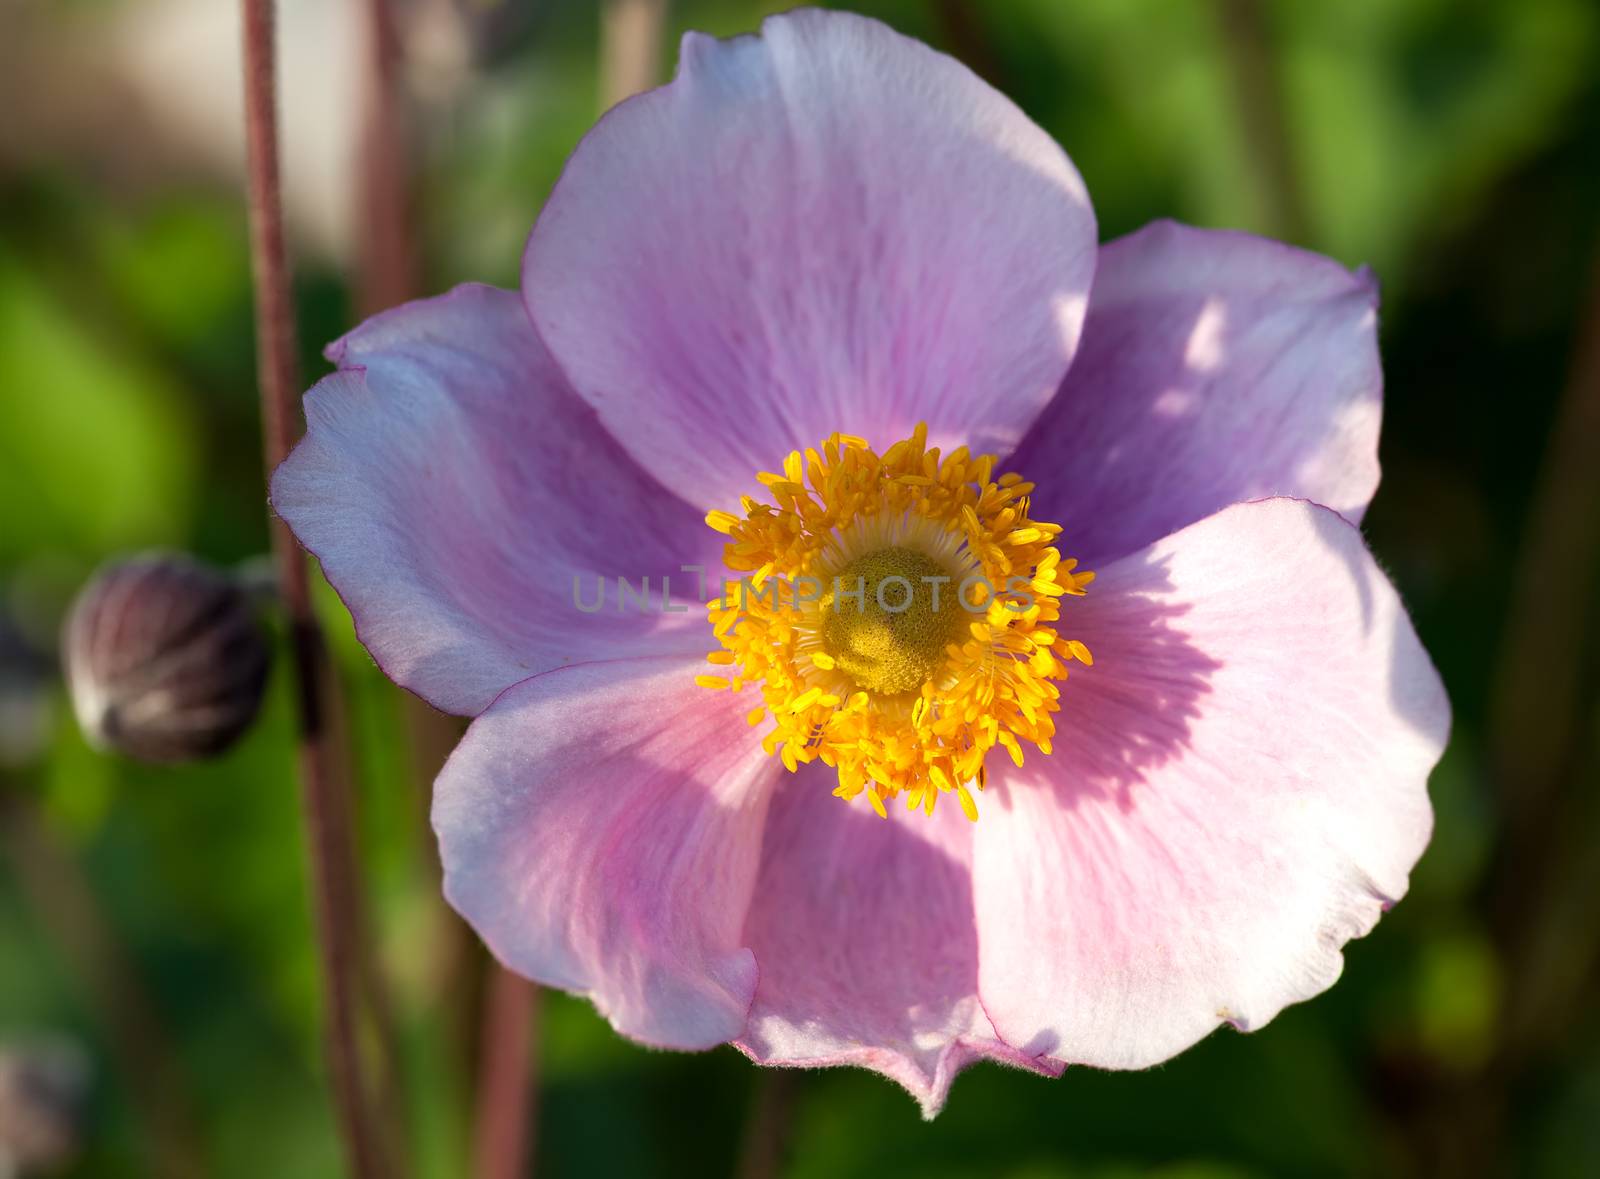 Anemone, family Ranunculaceae, native to temperate zones.  by motorolka